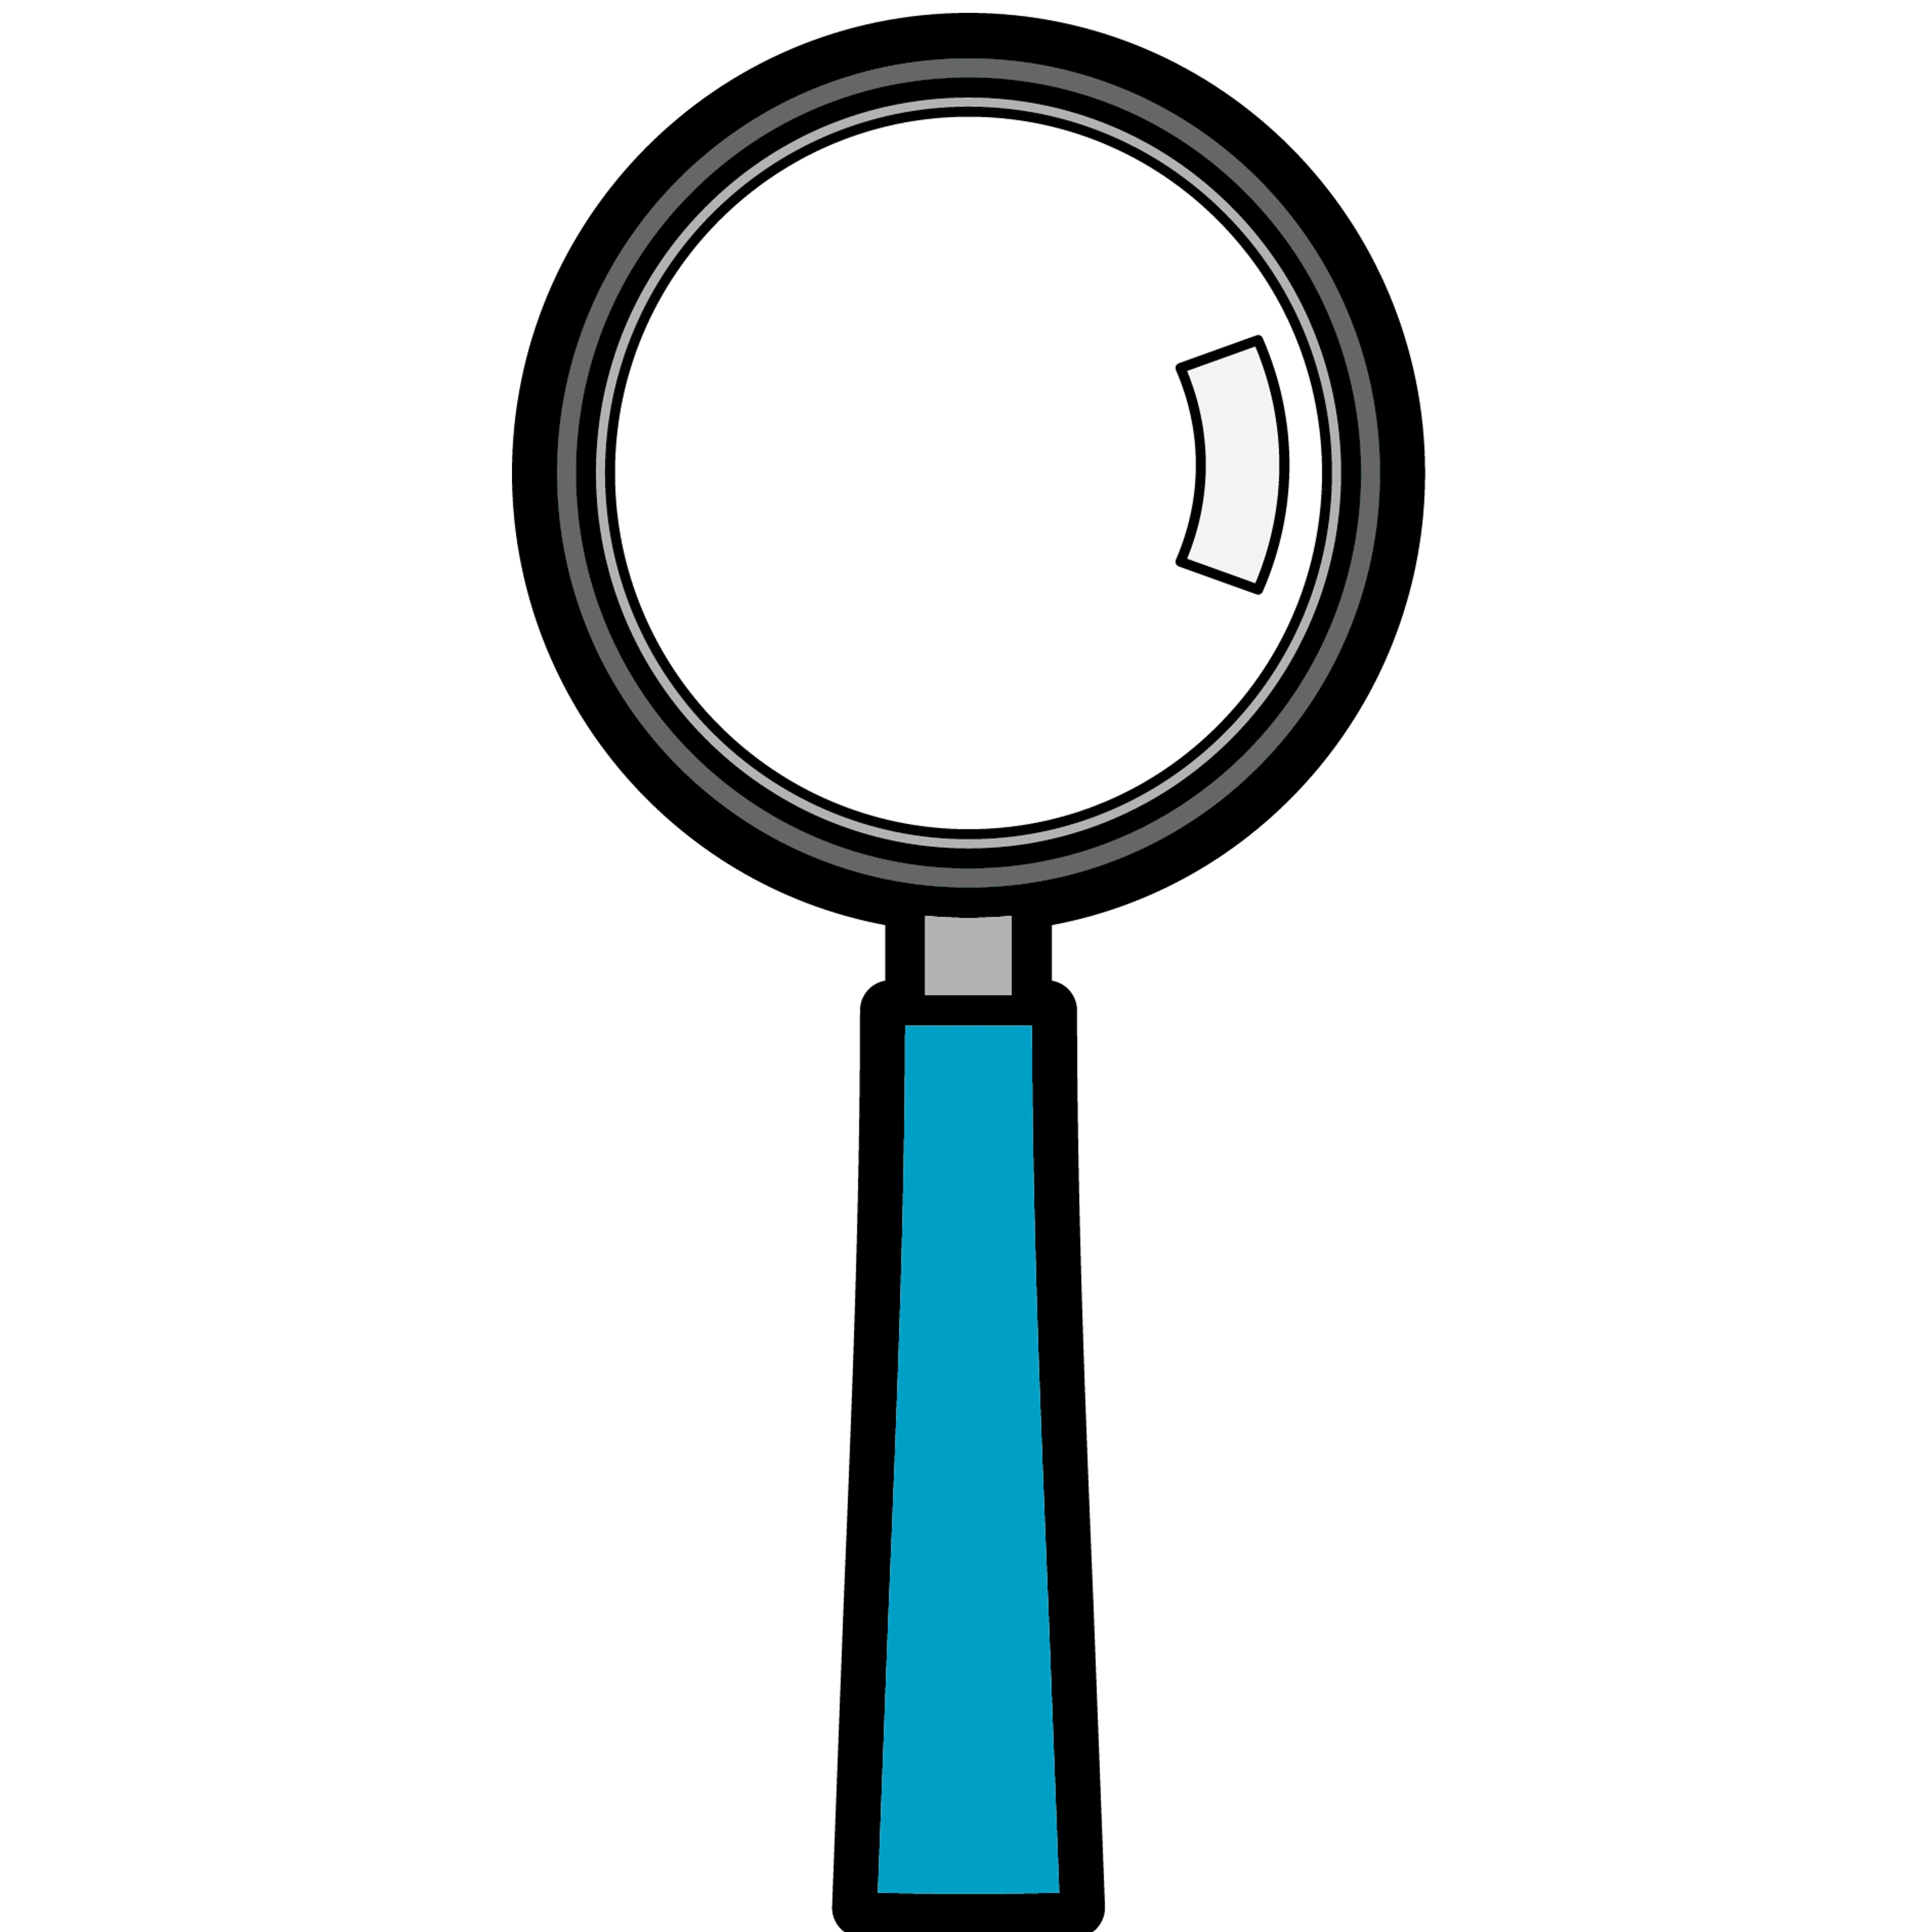 Detective Magnifying Glass Hd Photo Clipart